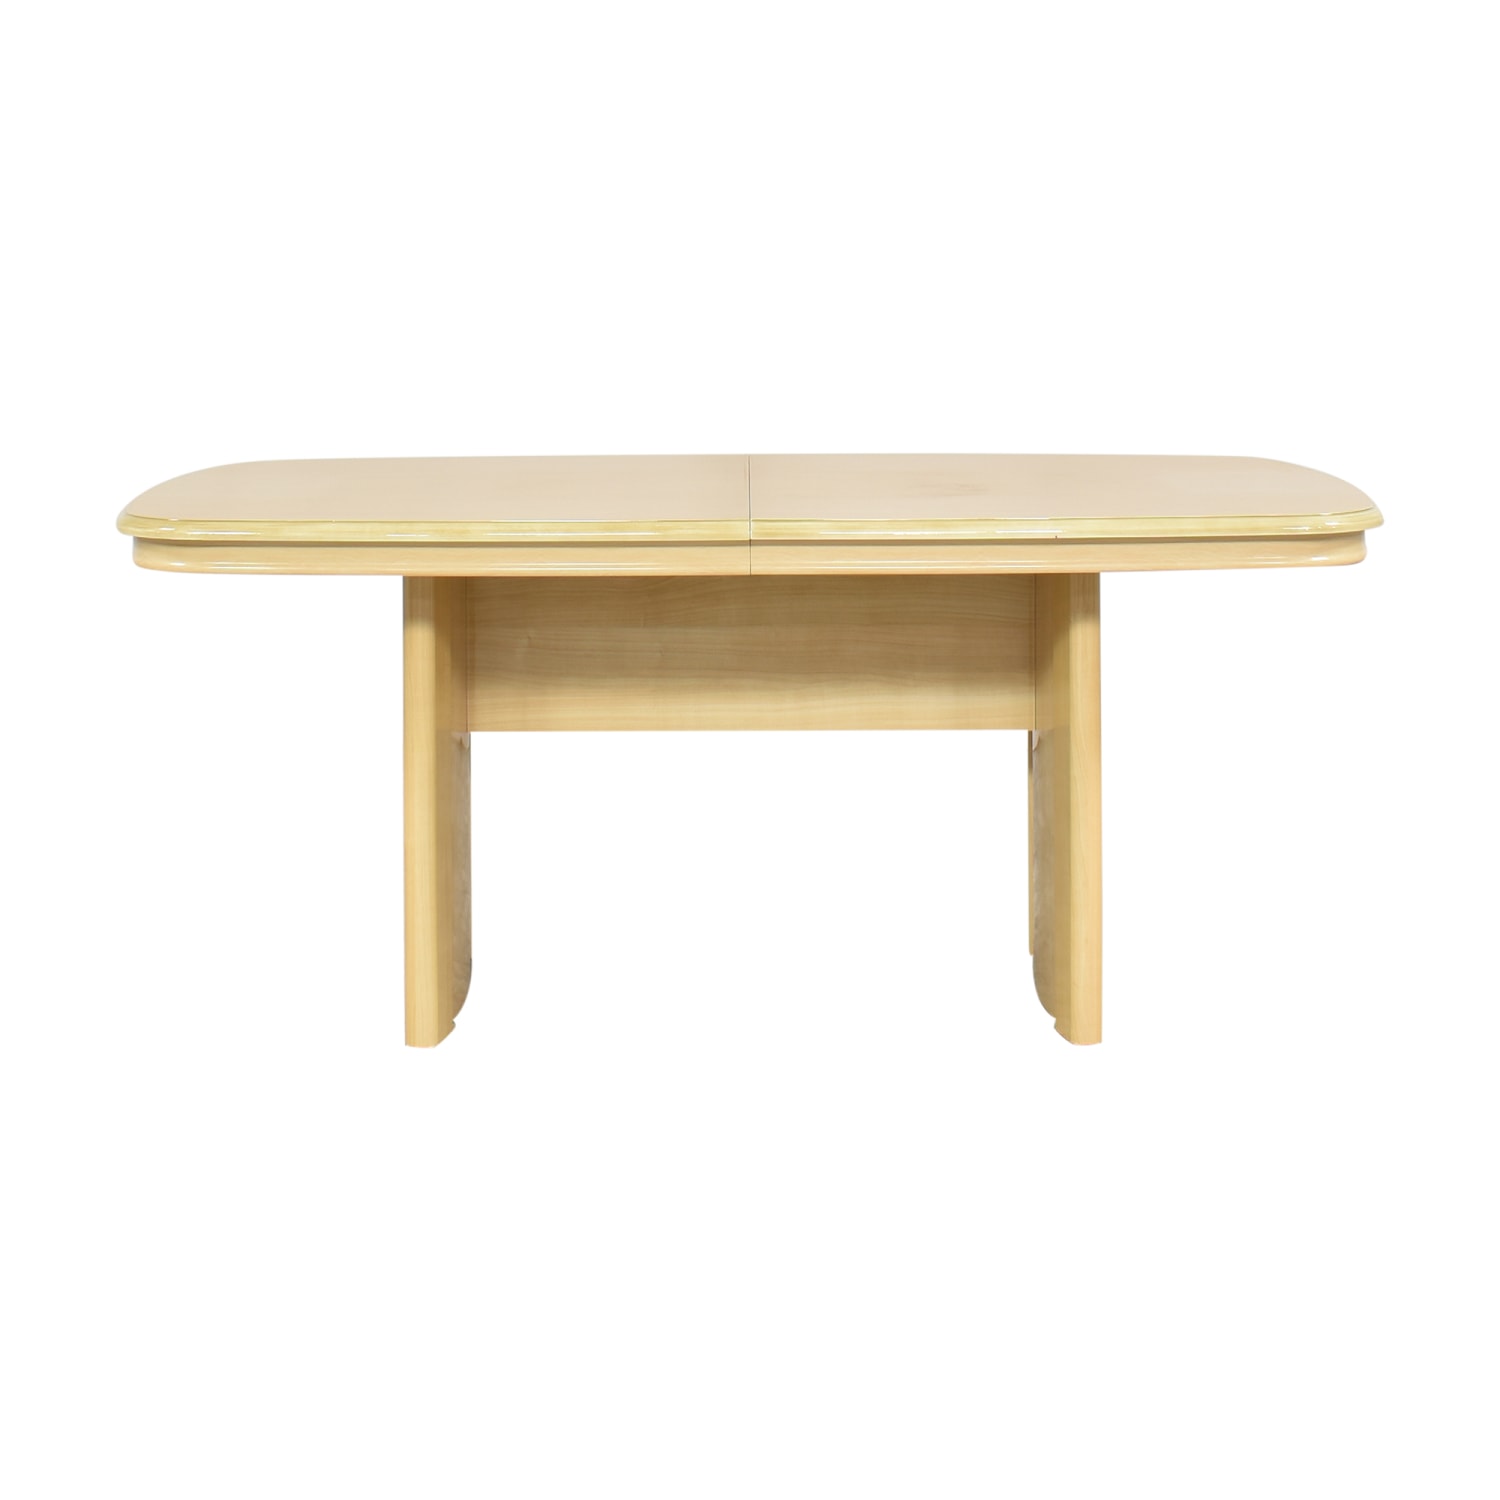 Seamans Seamans Oval Extendable Dining Table  ma